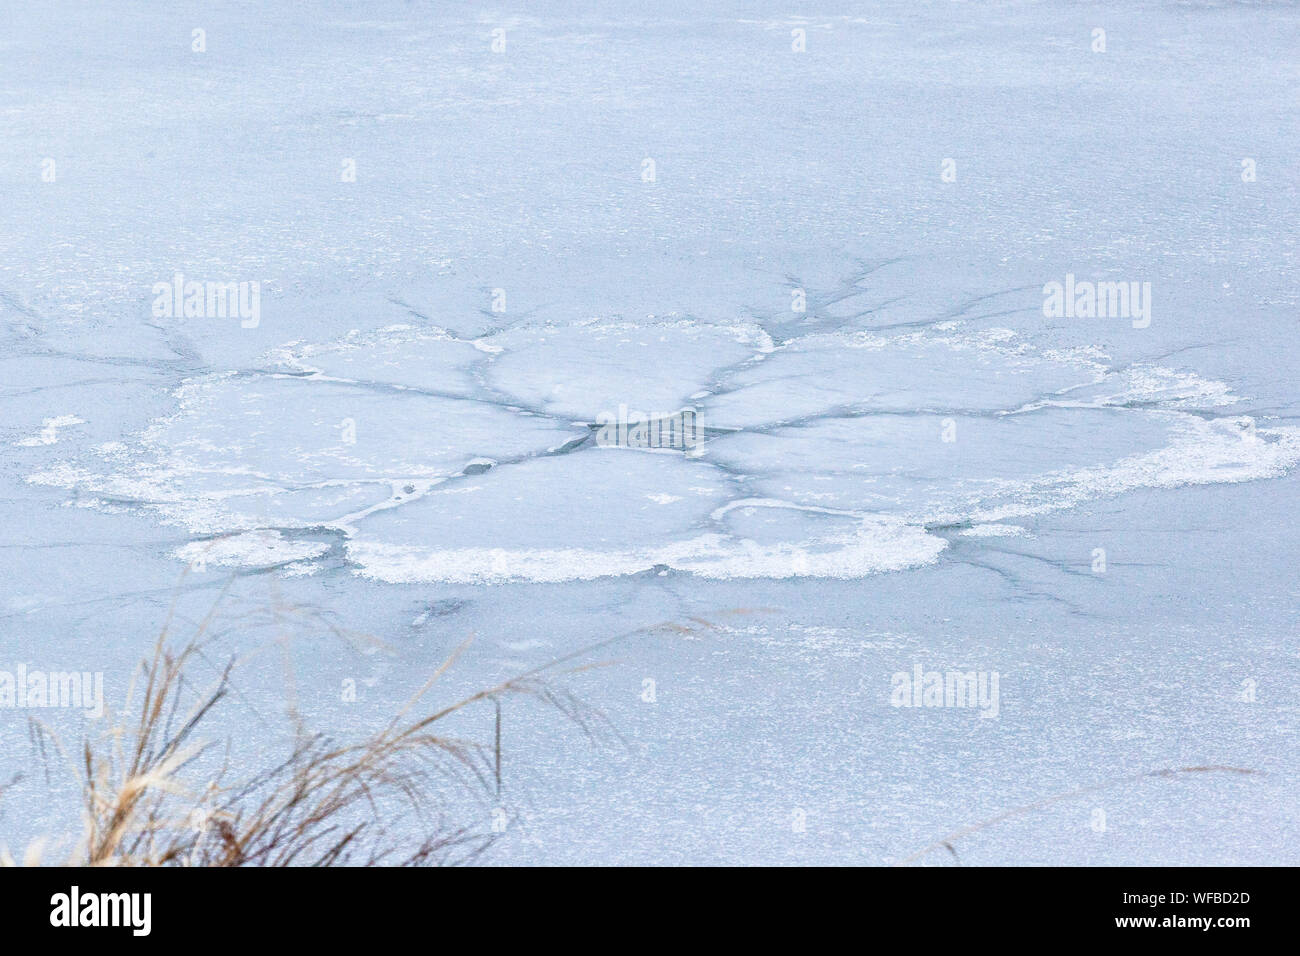 Ice melting in the marshes, Grant Narrows, Pitt Meadows, British Columbia, Canada Stock Photo